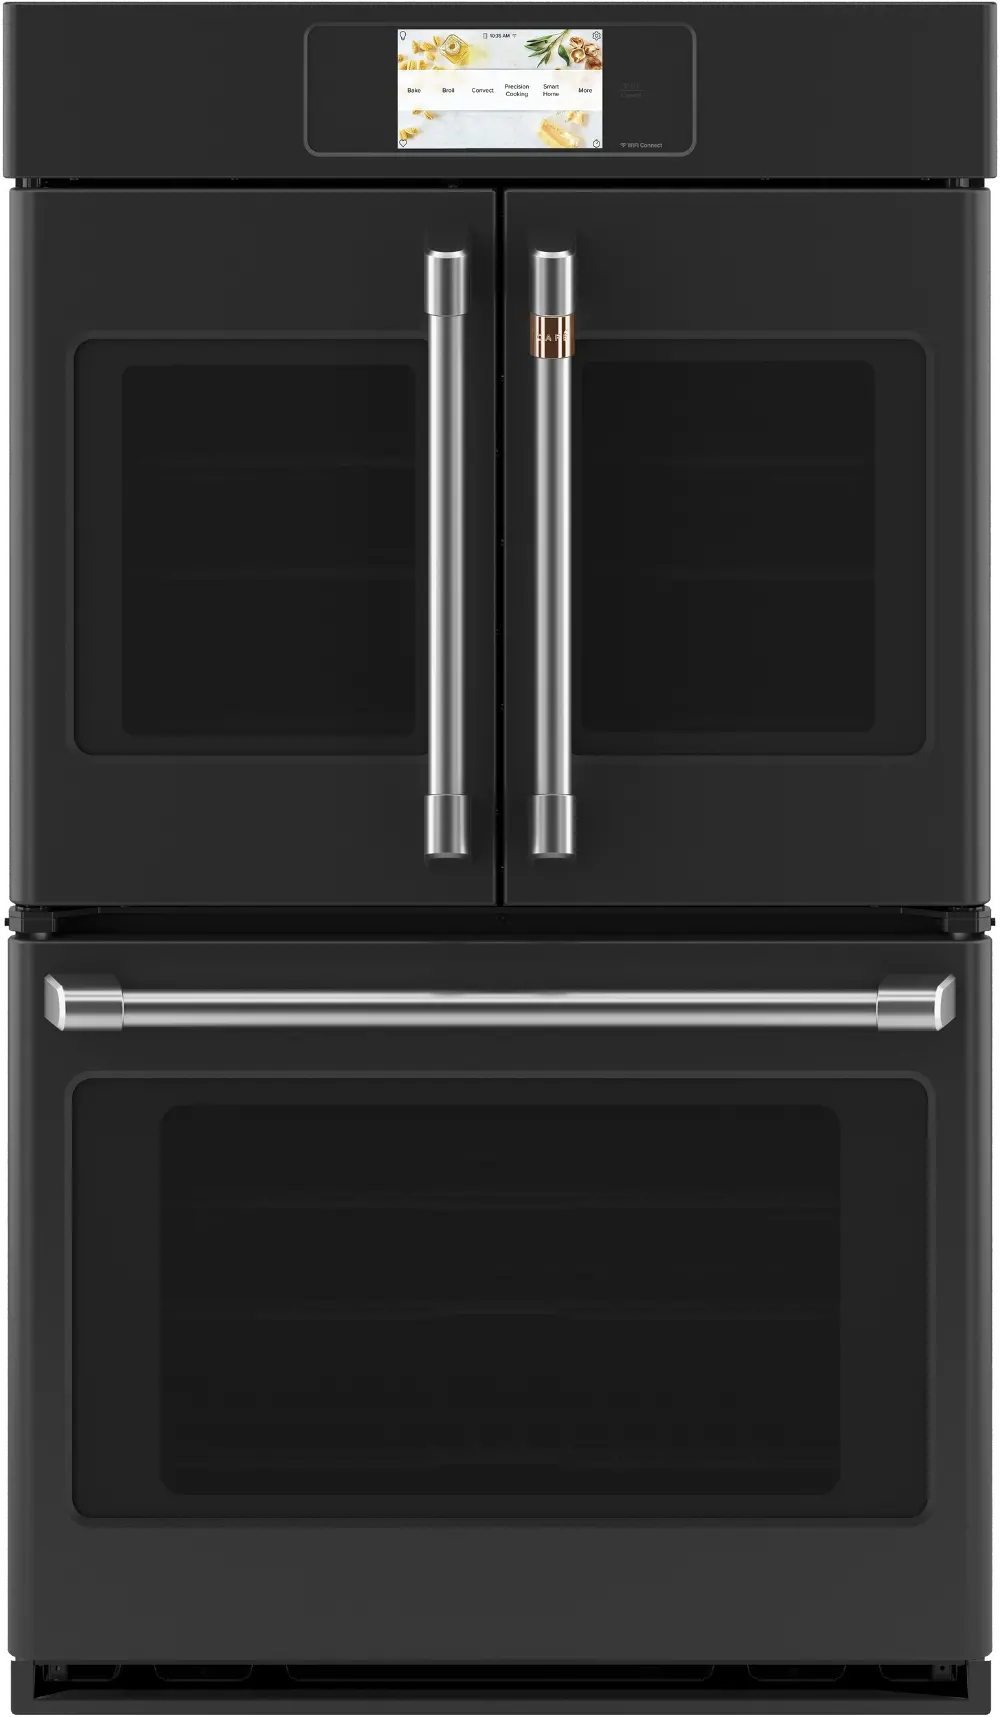 CTD90FP3ND1 Cafe Professional 10 cu ft Double Wall Oven - Black 30 Inch-1